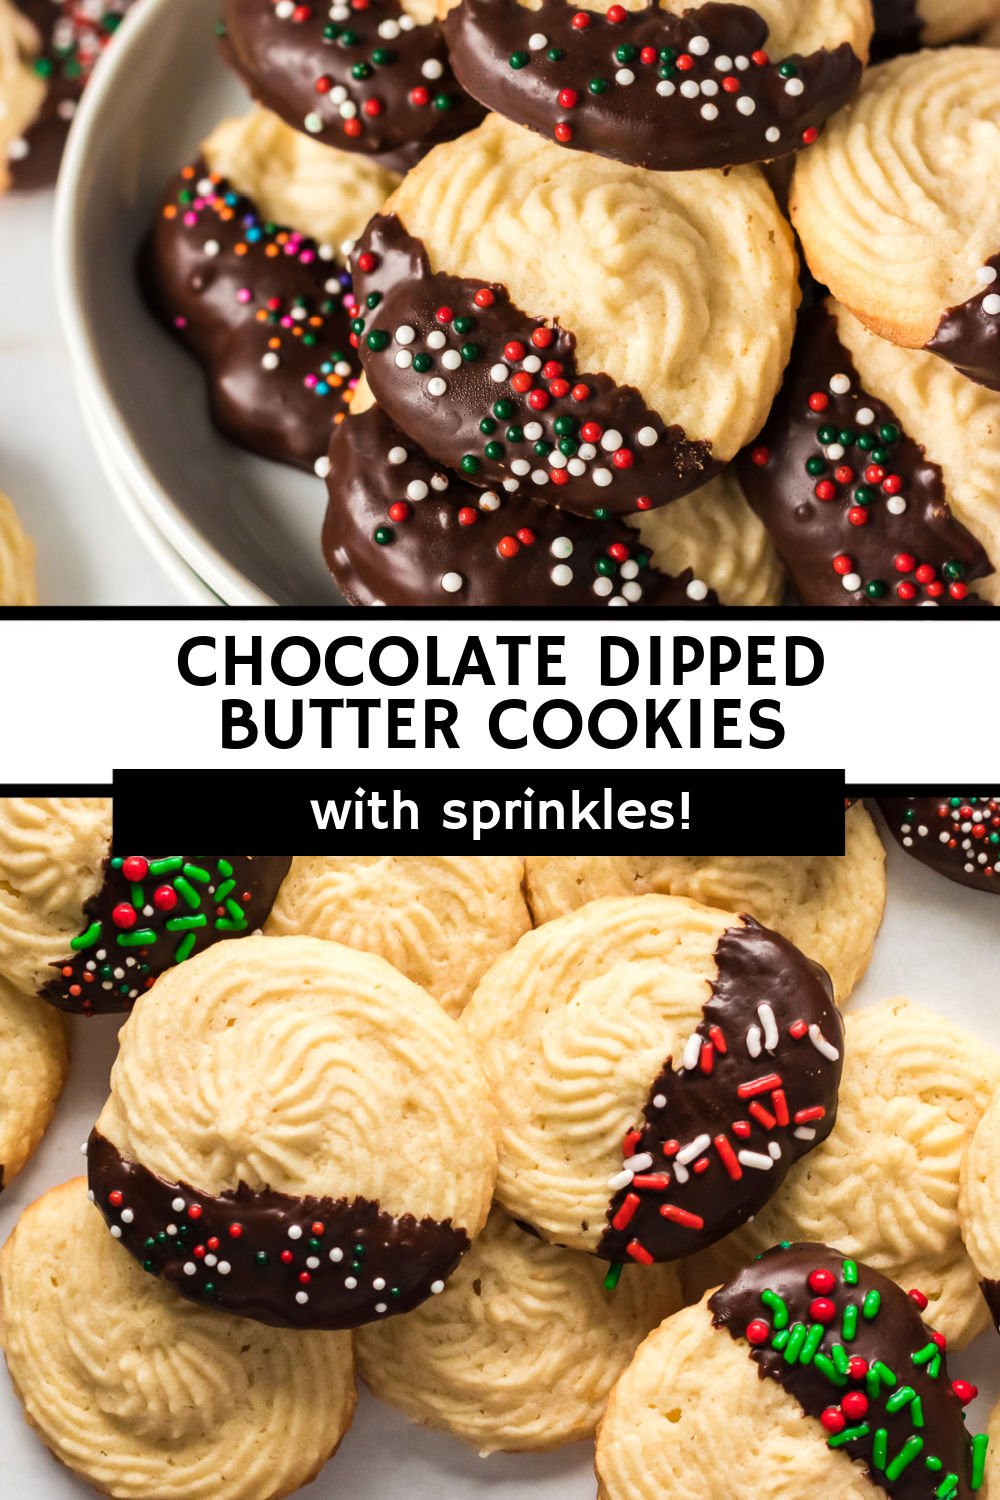 Simple chocolate dipped butter cookies are a holiday staple. Pipe them into swirls, dip them in dark chocolate, add some sprinkles, and you've got a classic cookie everyone knows and loves. | www.persnicketyplates.com